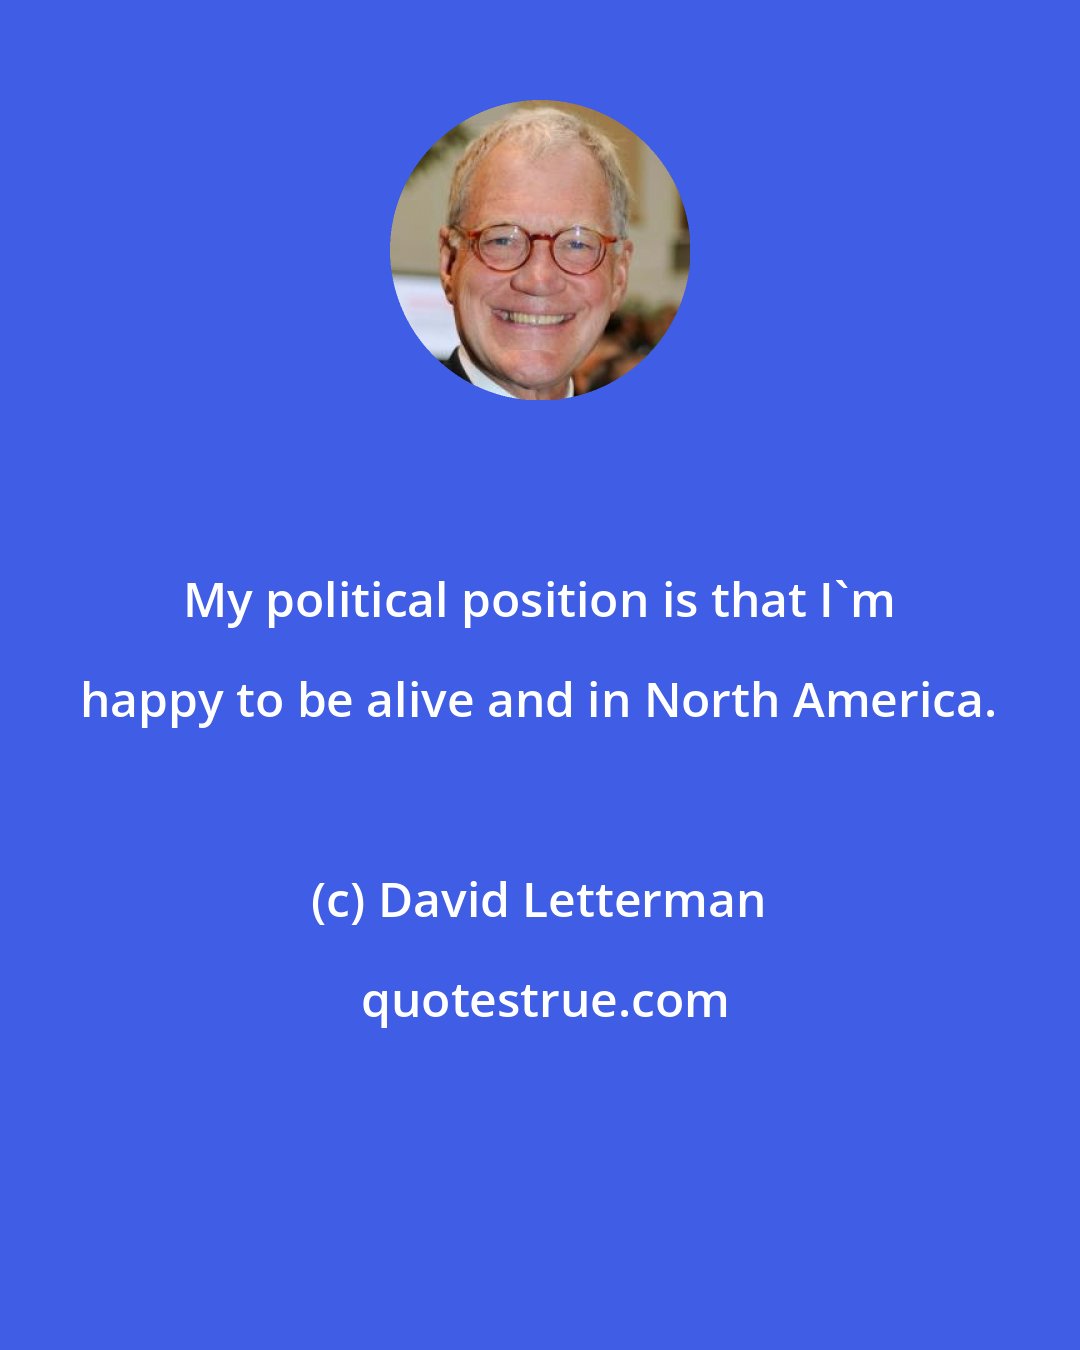 David Letterman: My political position is that I'm happy to be alive and in North America.